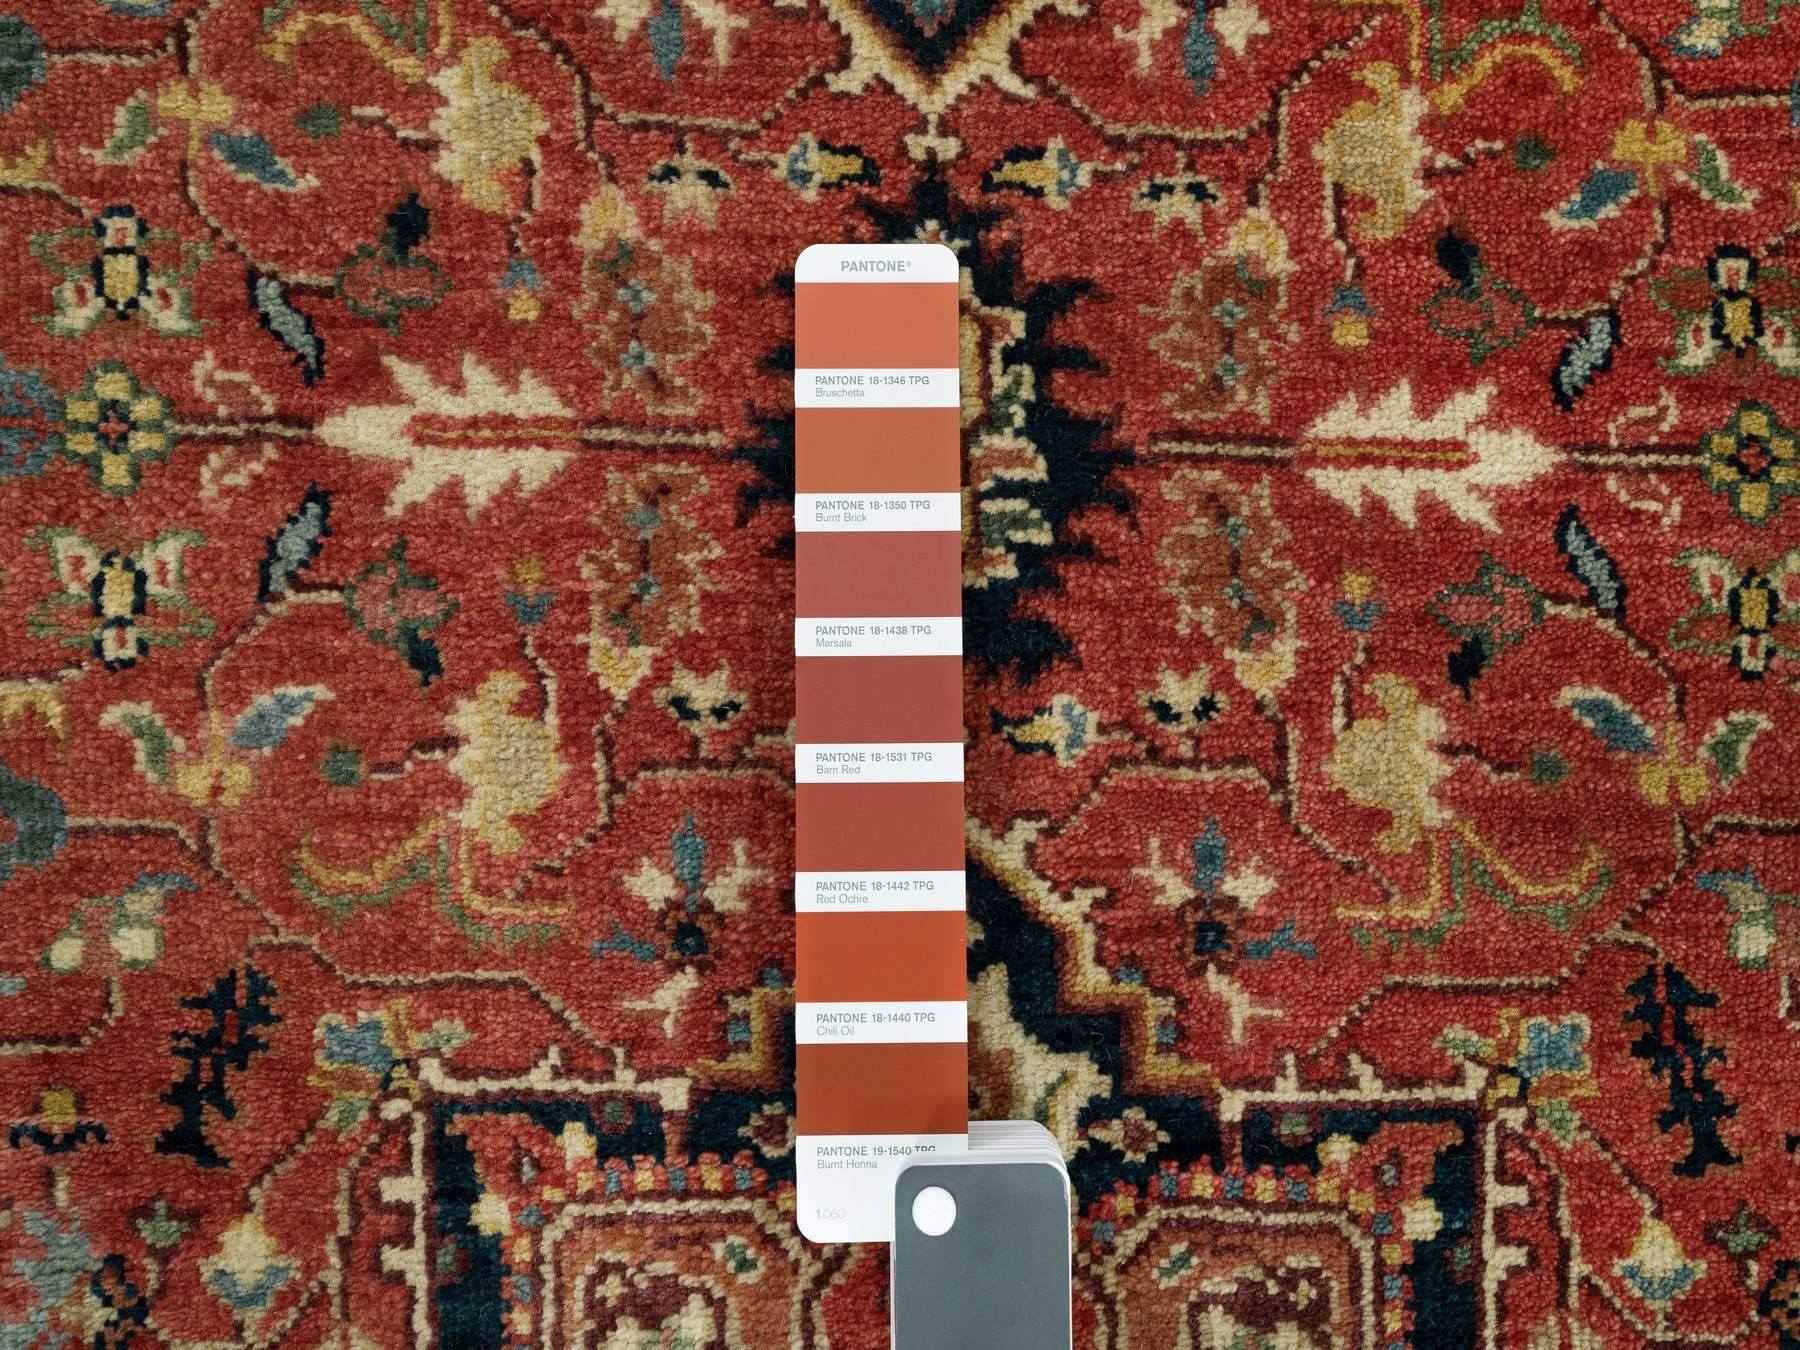 HerizRugs ORC810828